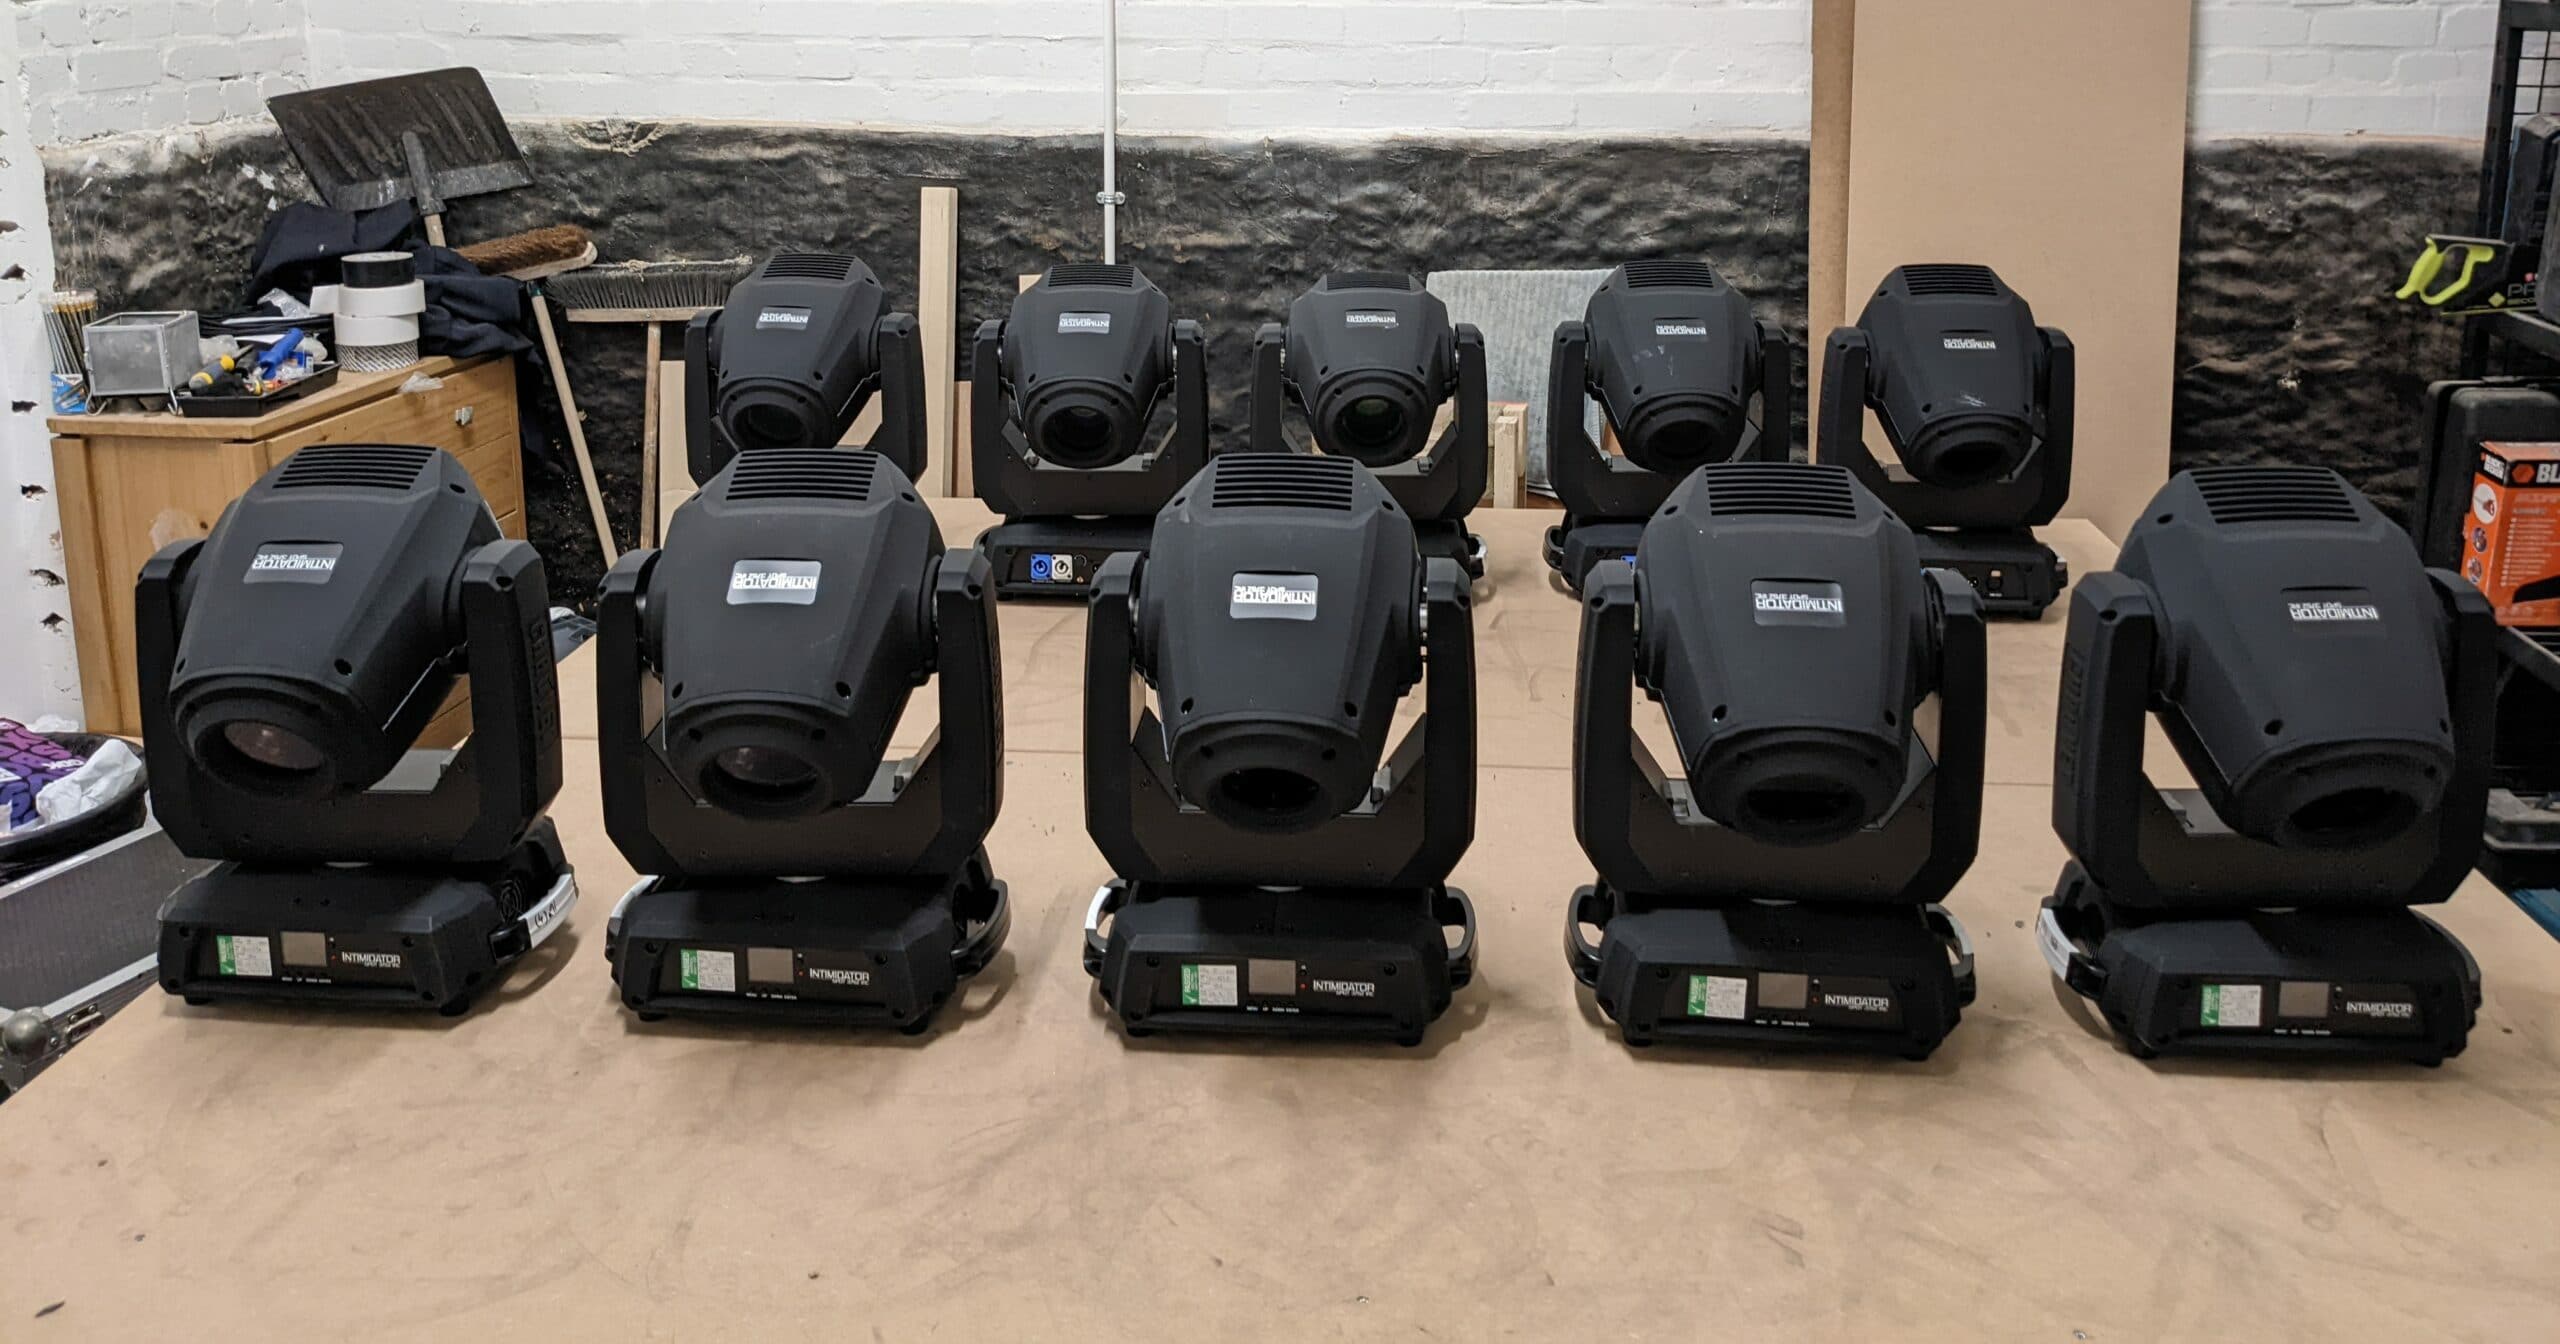 Service Report – 20 Moving Heads